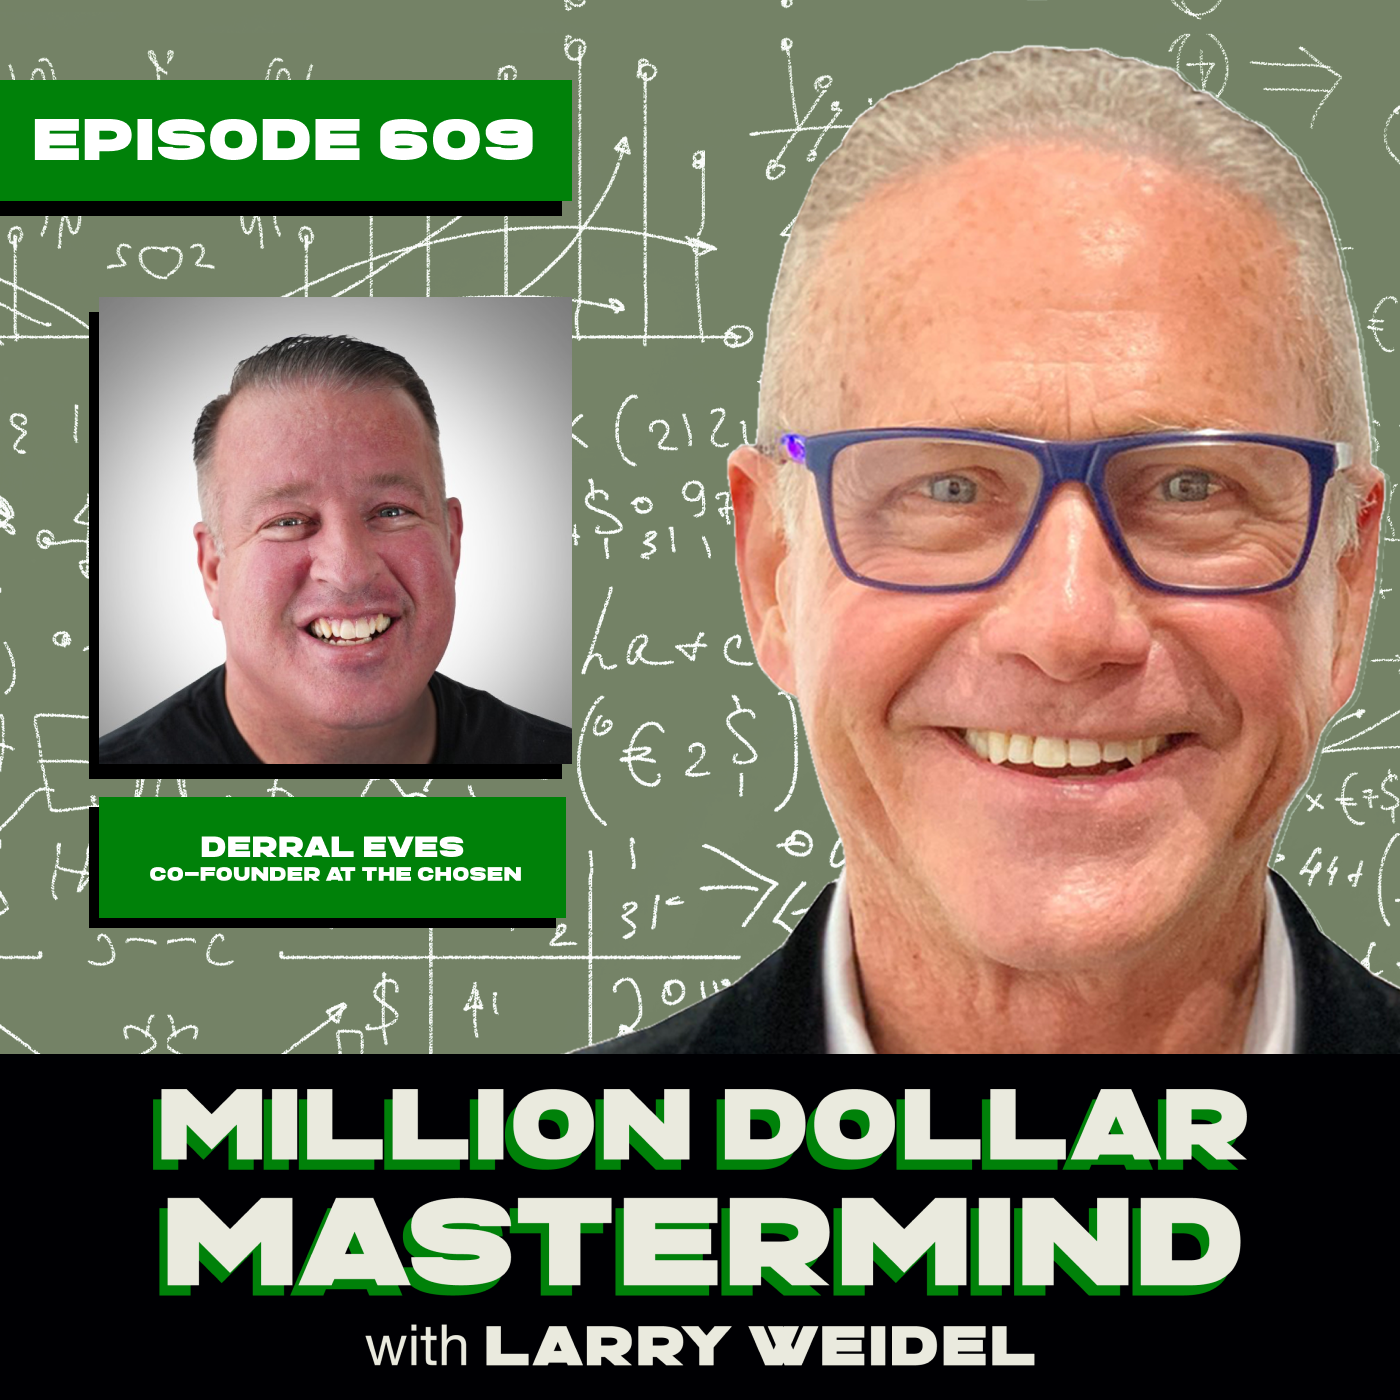 Episode #609 - Figure Out How To Make Money Work For You with Derral Eves, Co-Founder at The Chosen